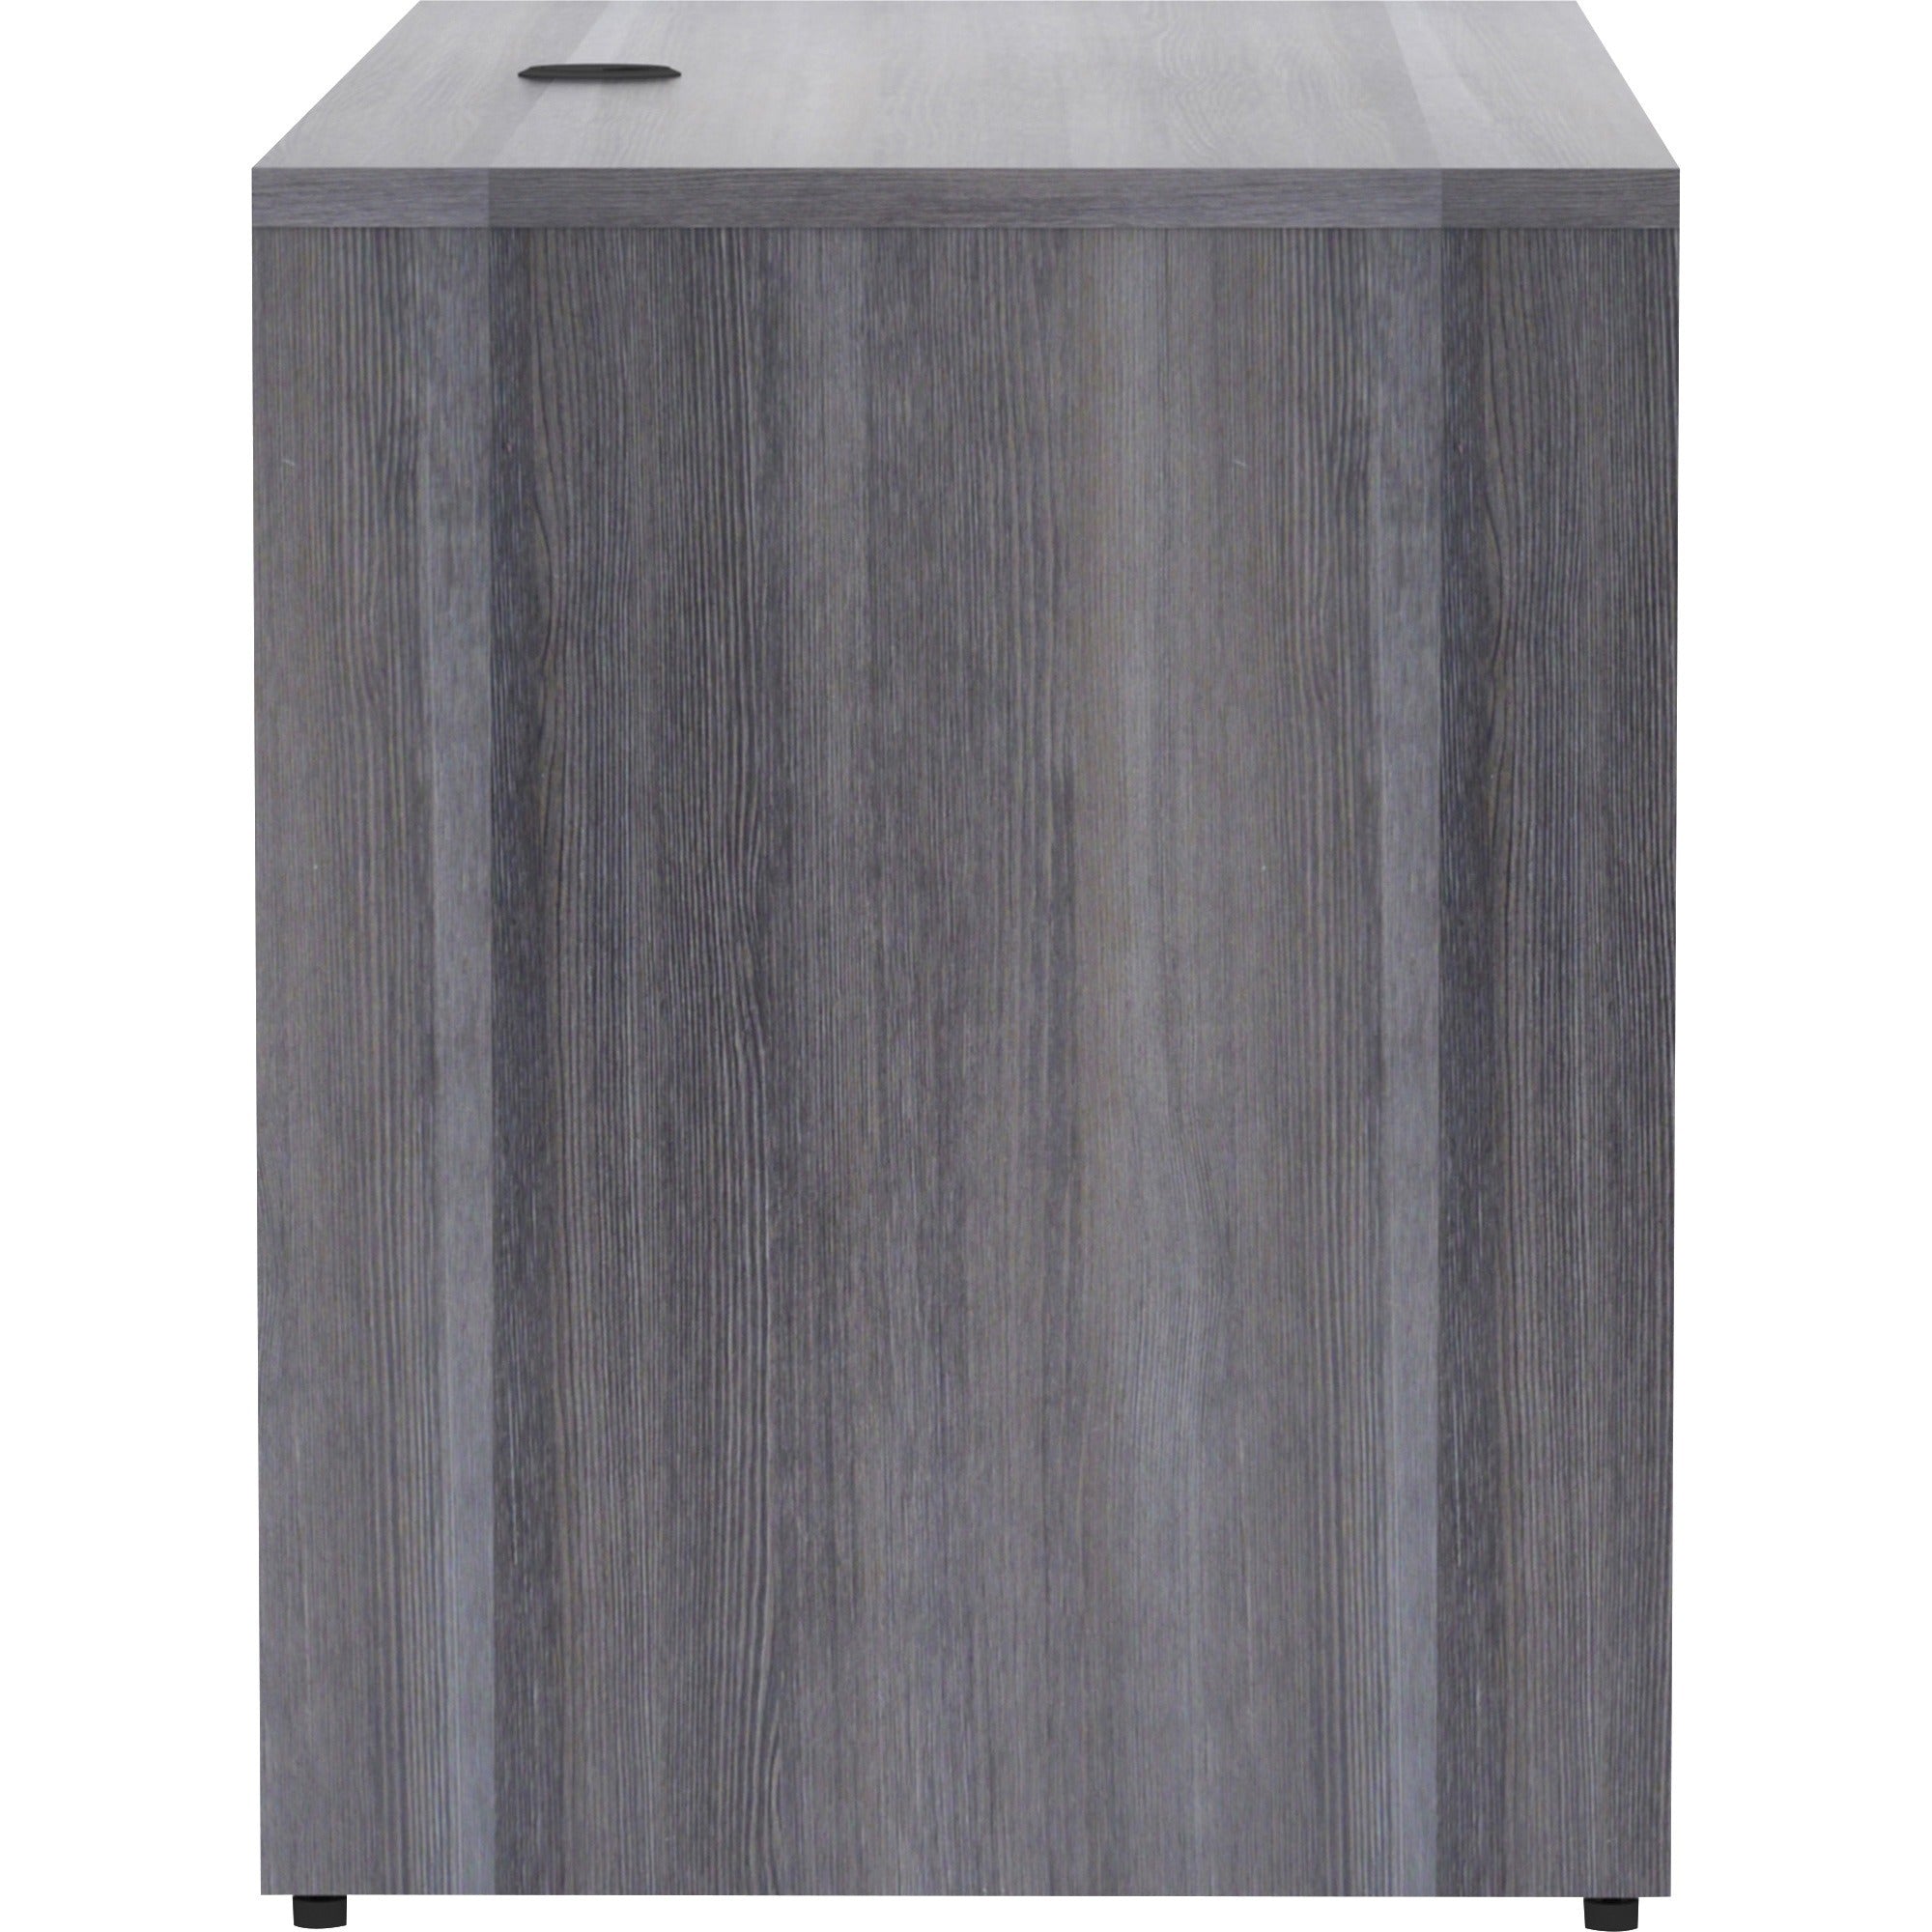 lorell-essentials-series-credenza-shell-60-x-24295--1-top-laminate-weathered-charcoal-table-top-modesty-panel_llr69553 - 3